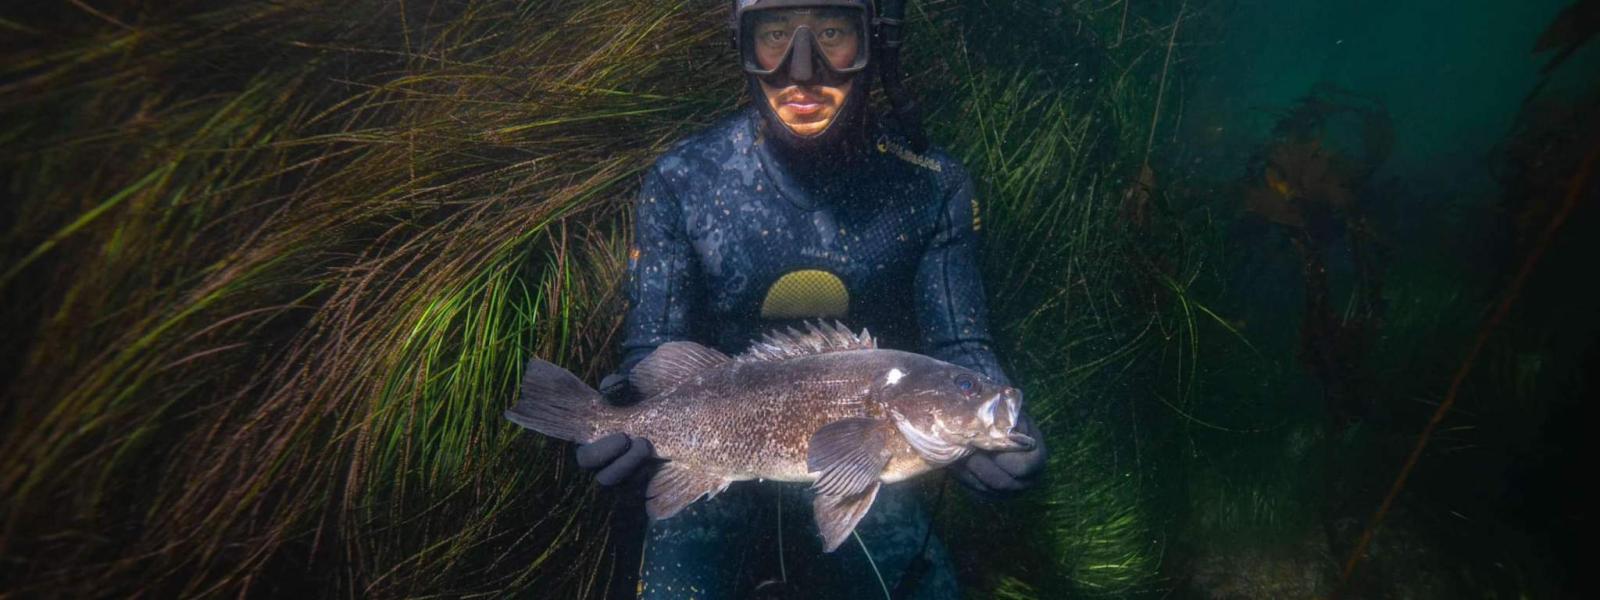 Spearfisher with rockfish. Photo by Preston Hoffman.